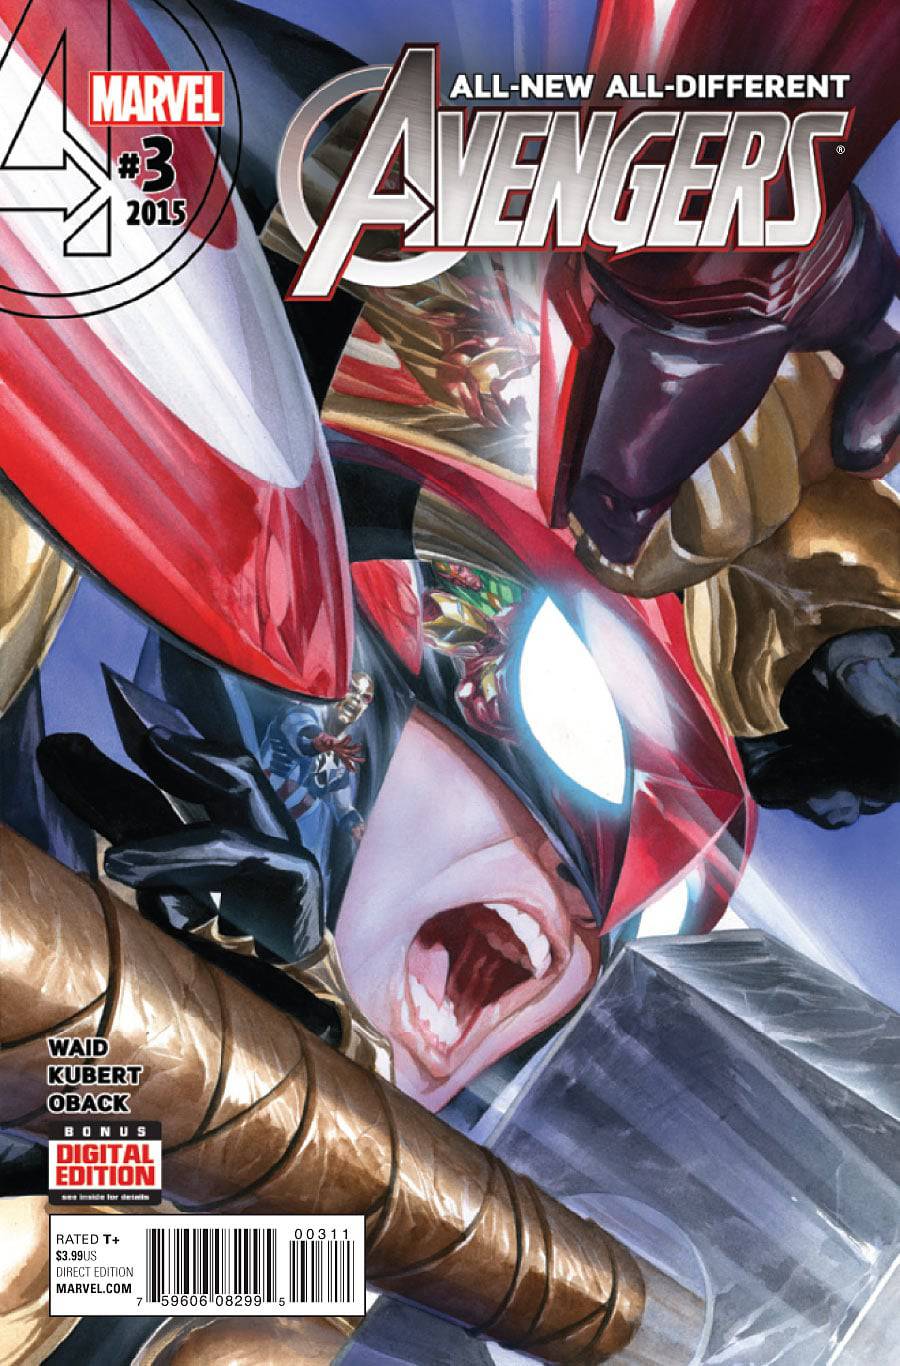 All New All Different Avengers (2016) #3 King Gaming